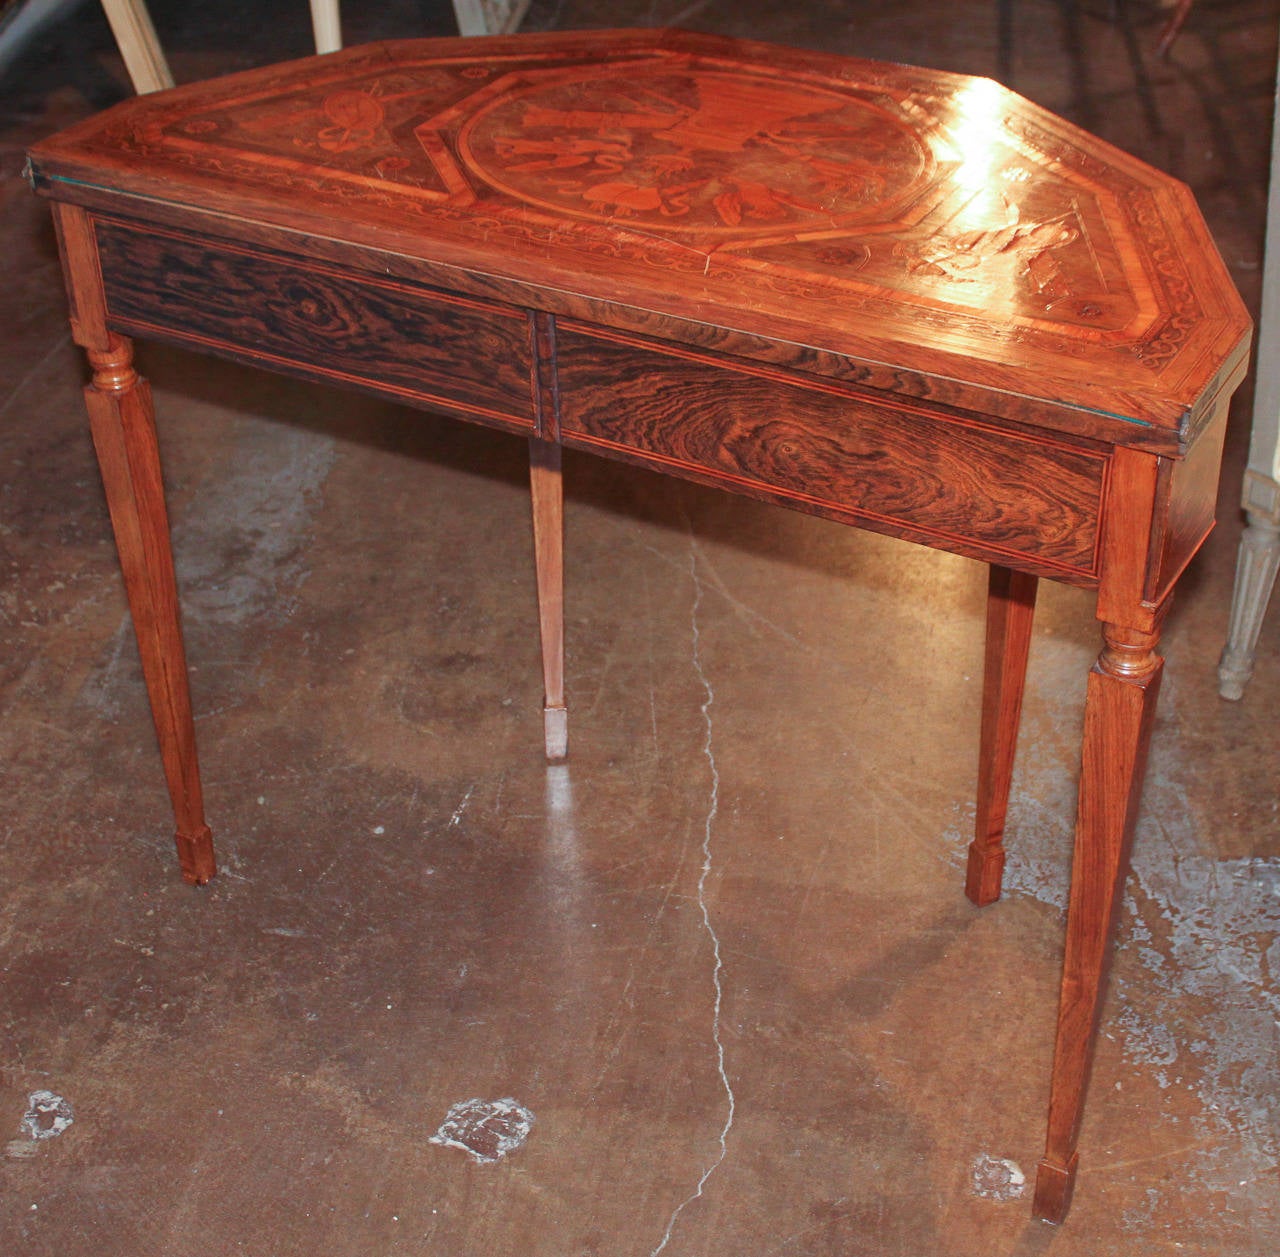 Neoclassical Fine 18th Century Italian Inlaid Games Table For Sale